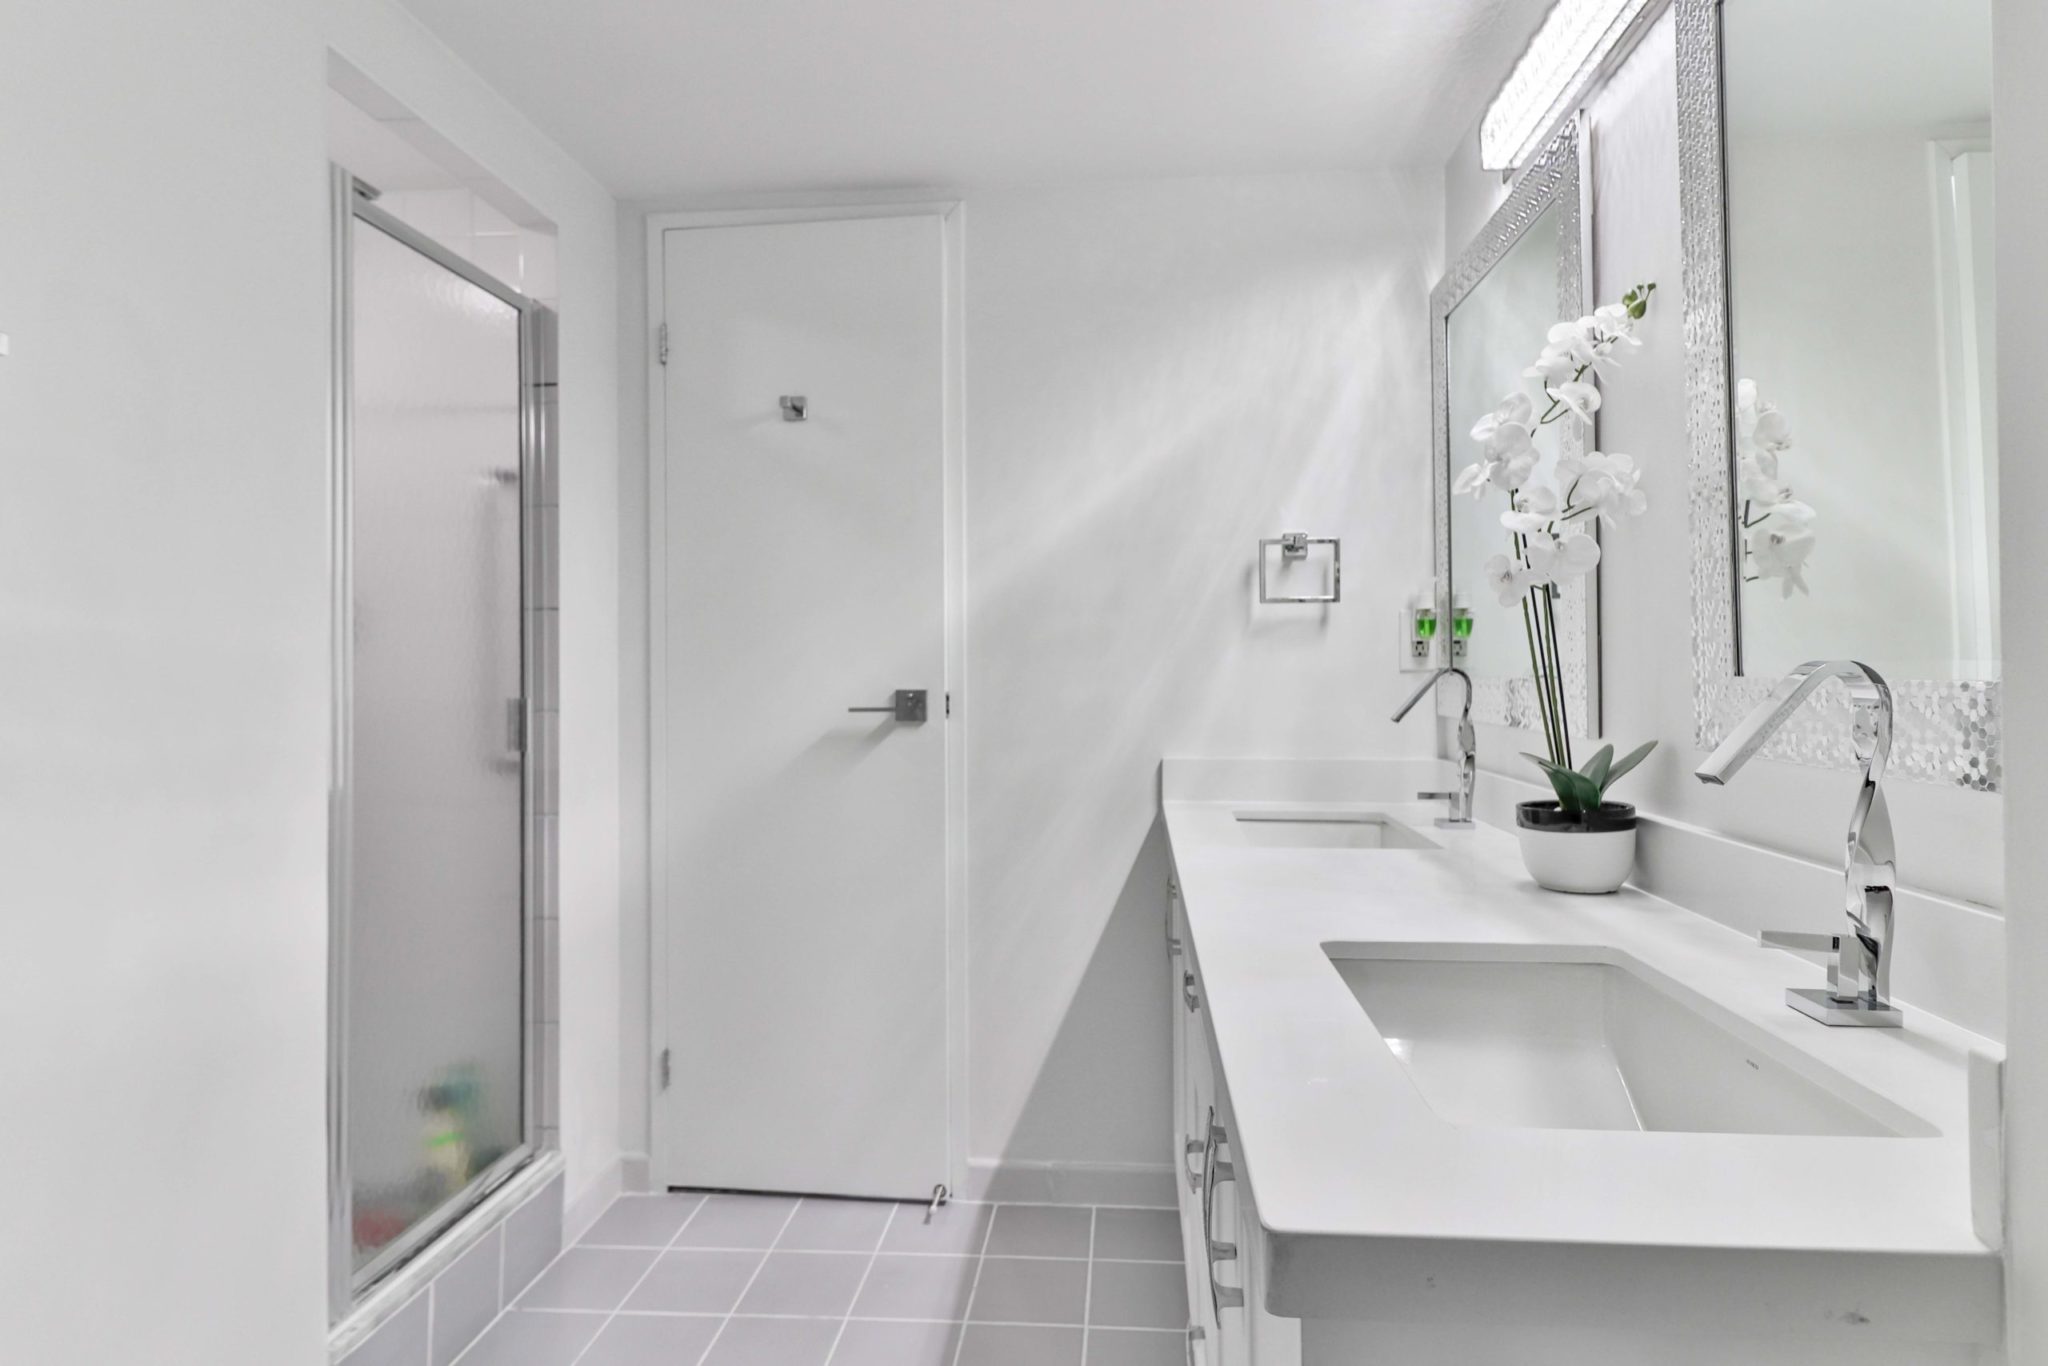 Ensuite bath with chic new faucets, double sinks, modern lighting and white quartz counter.